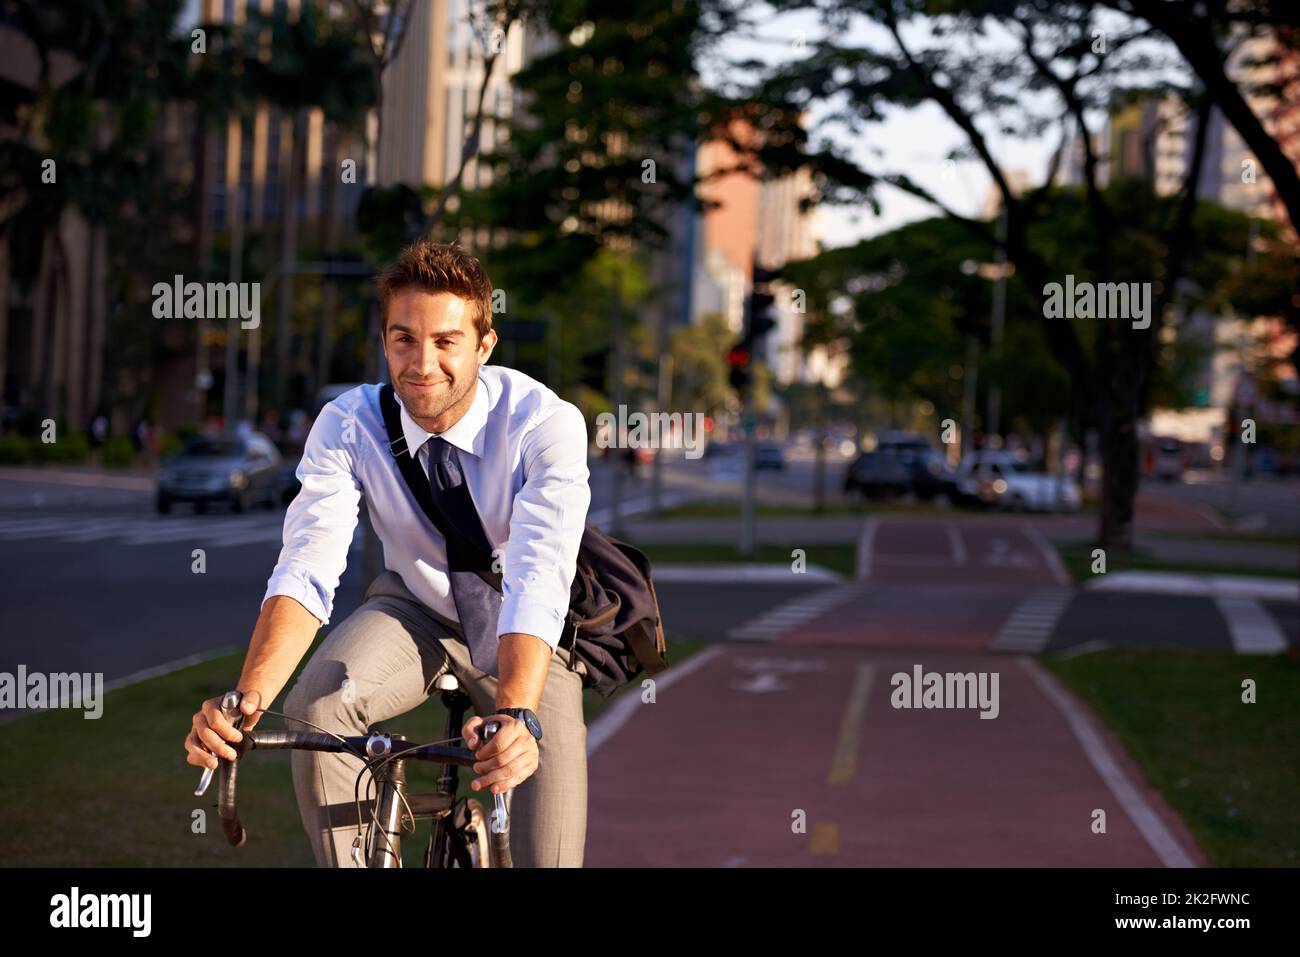 No gym membership needed. Shot of a businessman commuting to work with his bicycle. Stock Photo